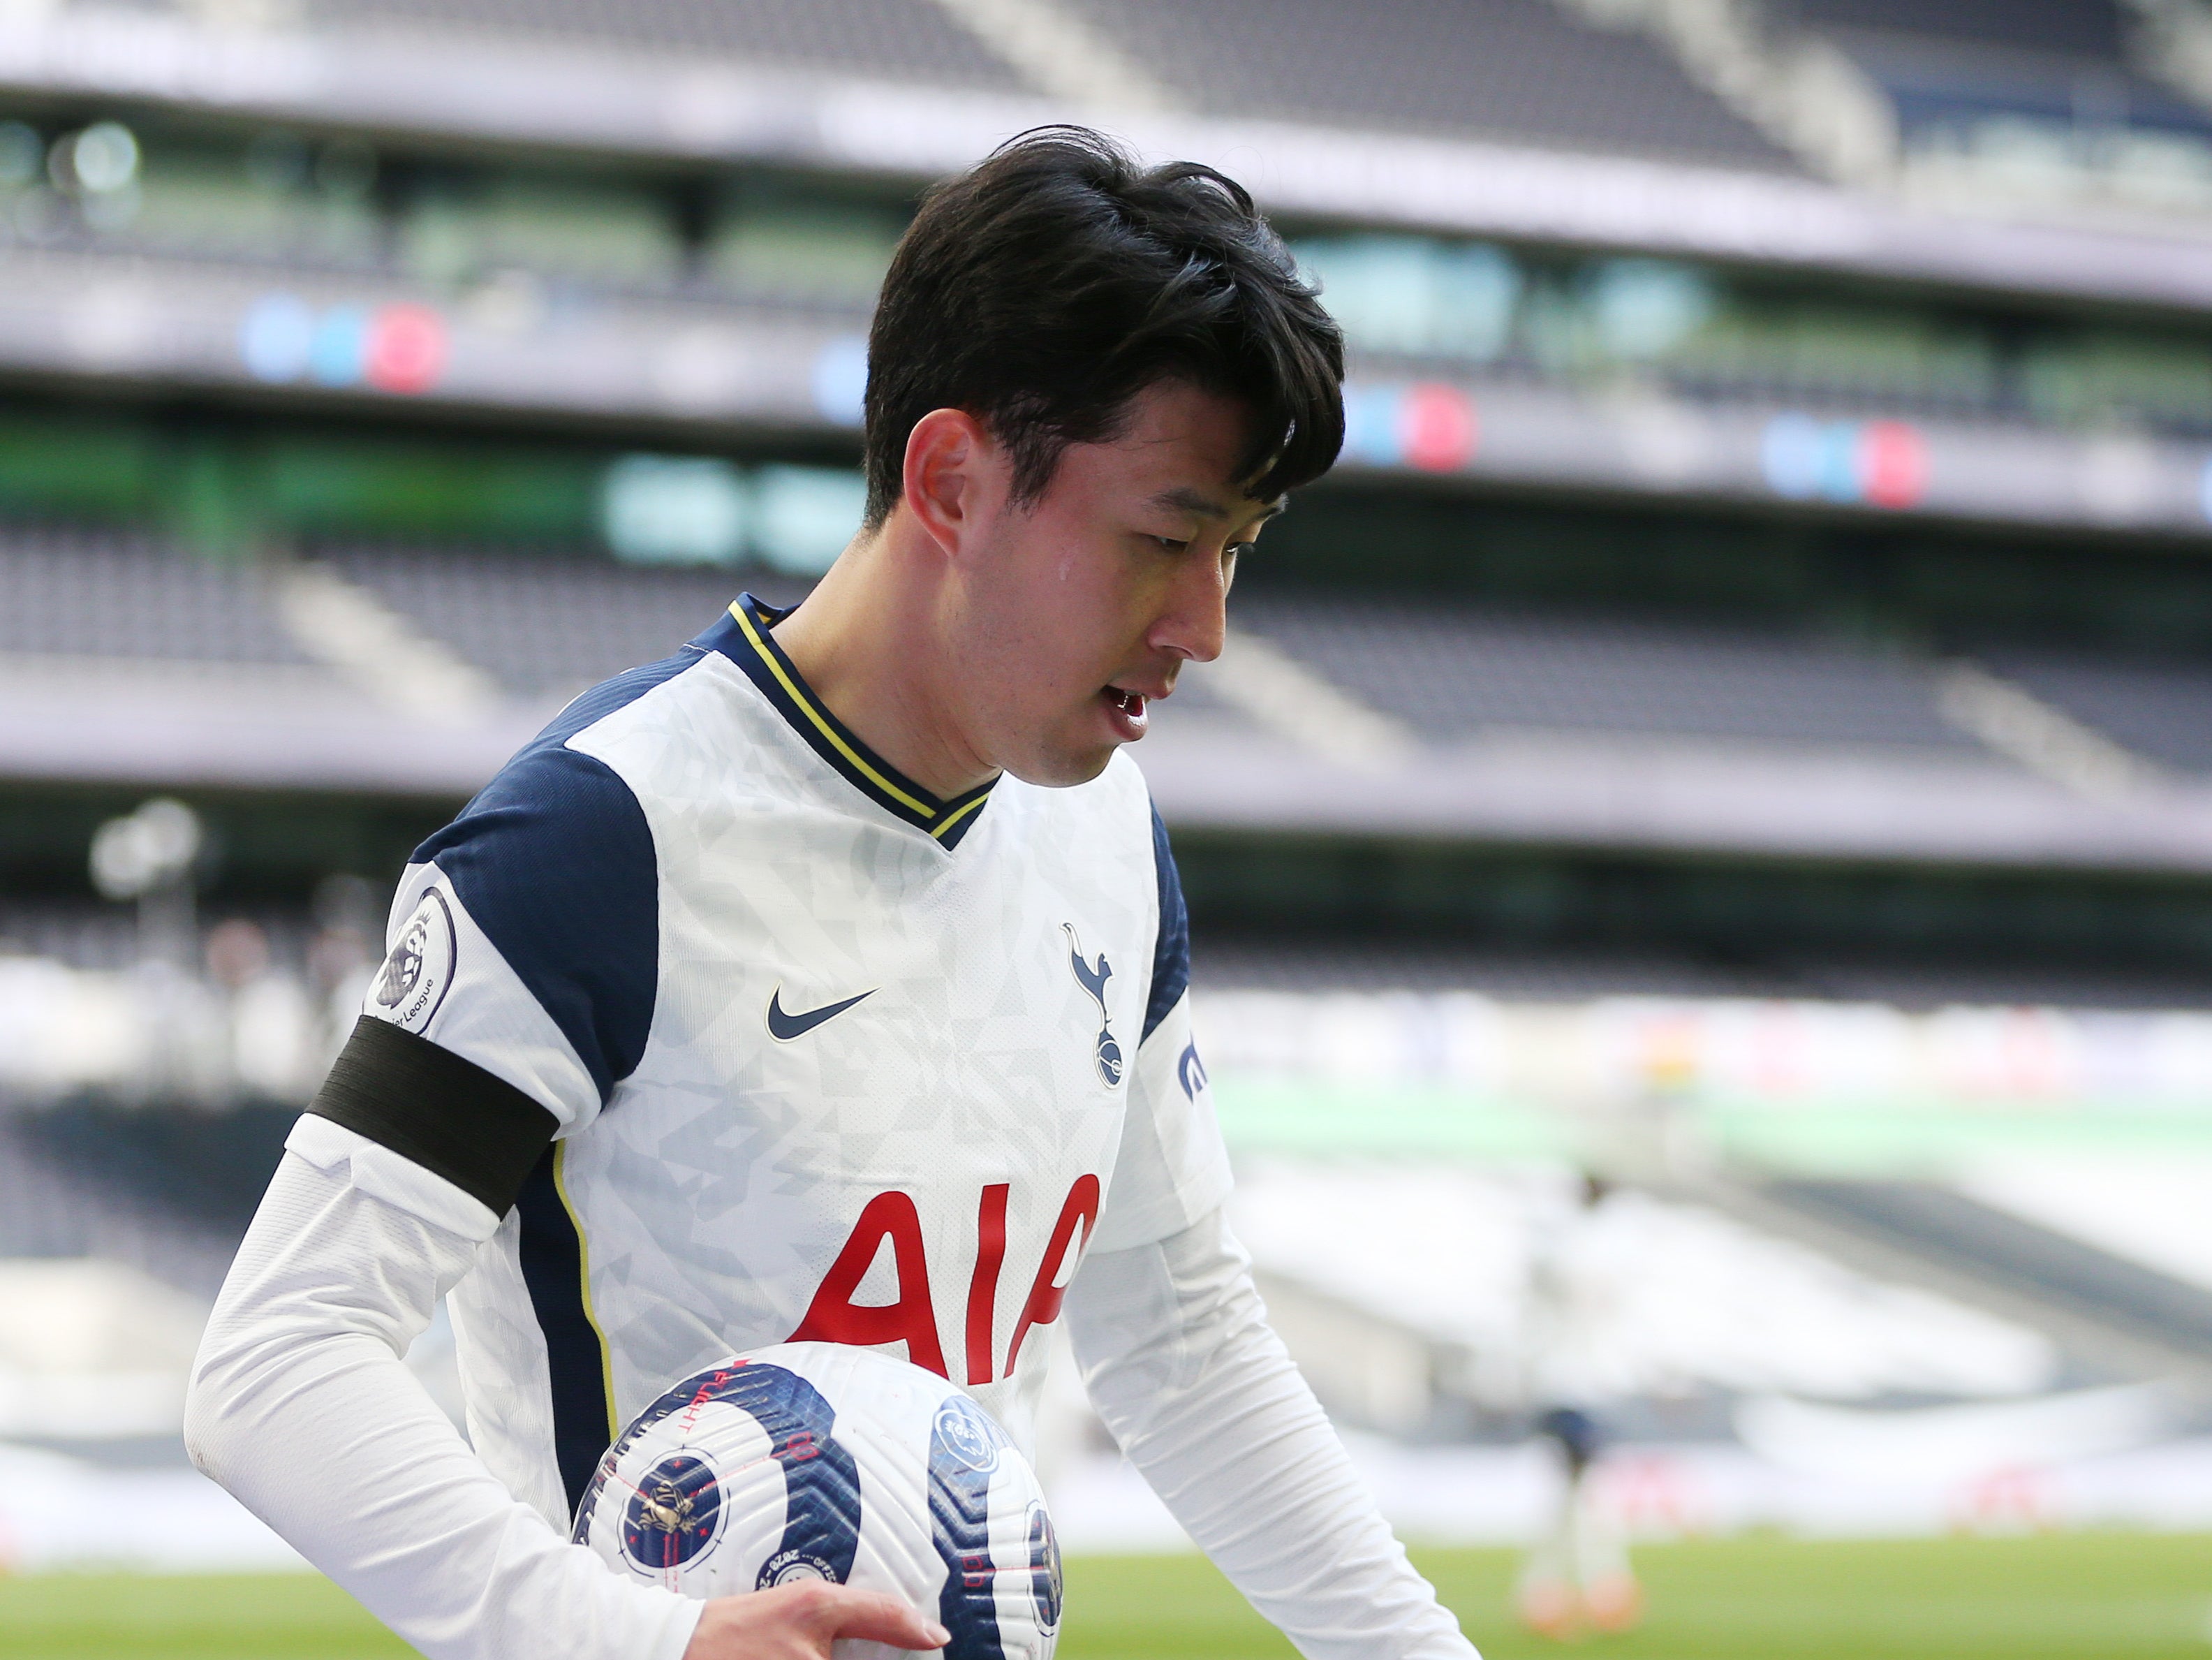 Tottenham midfielder Son Heung-min was allegedly the subject of online abuse